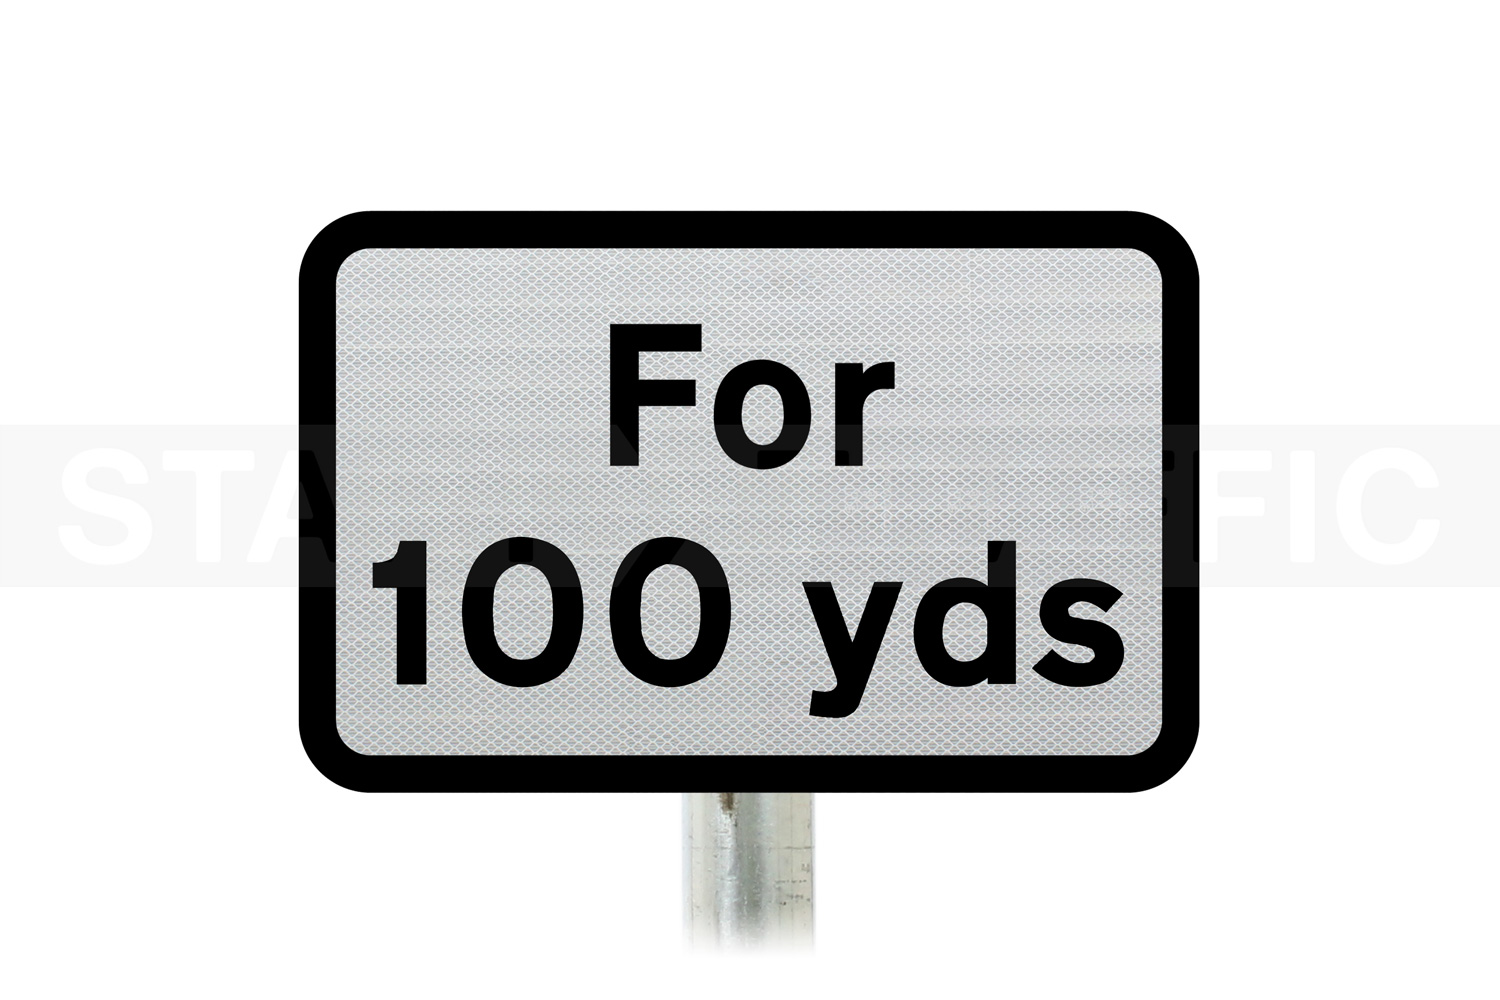 For 100 yards distance plate